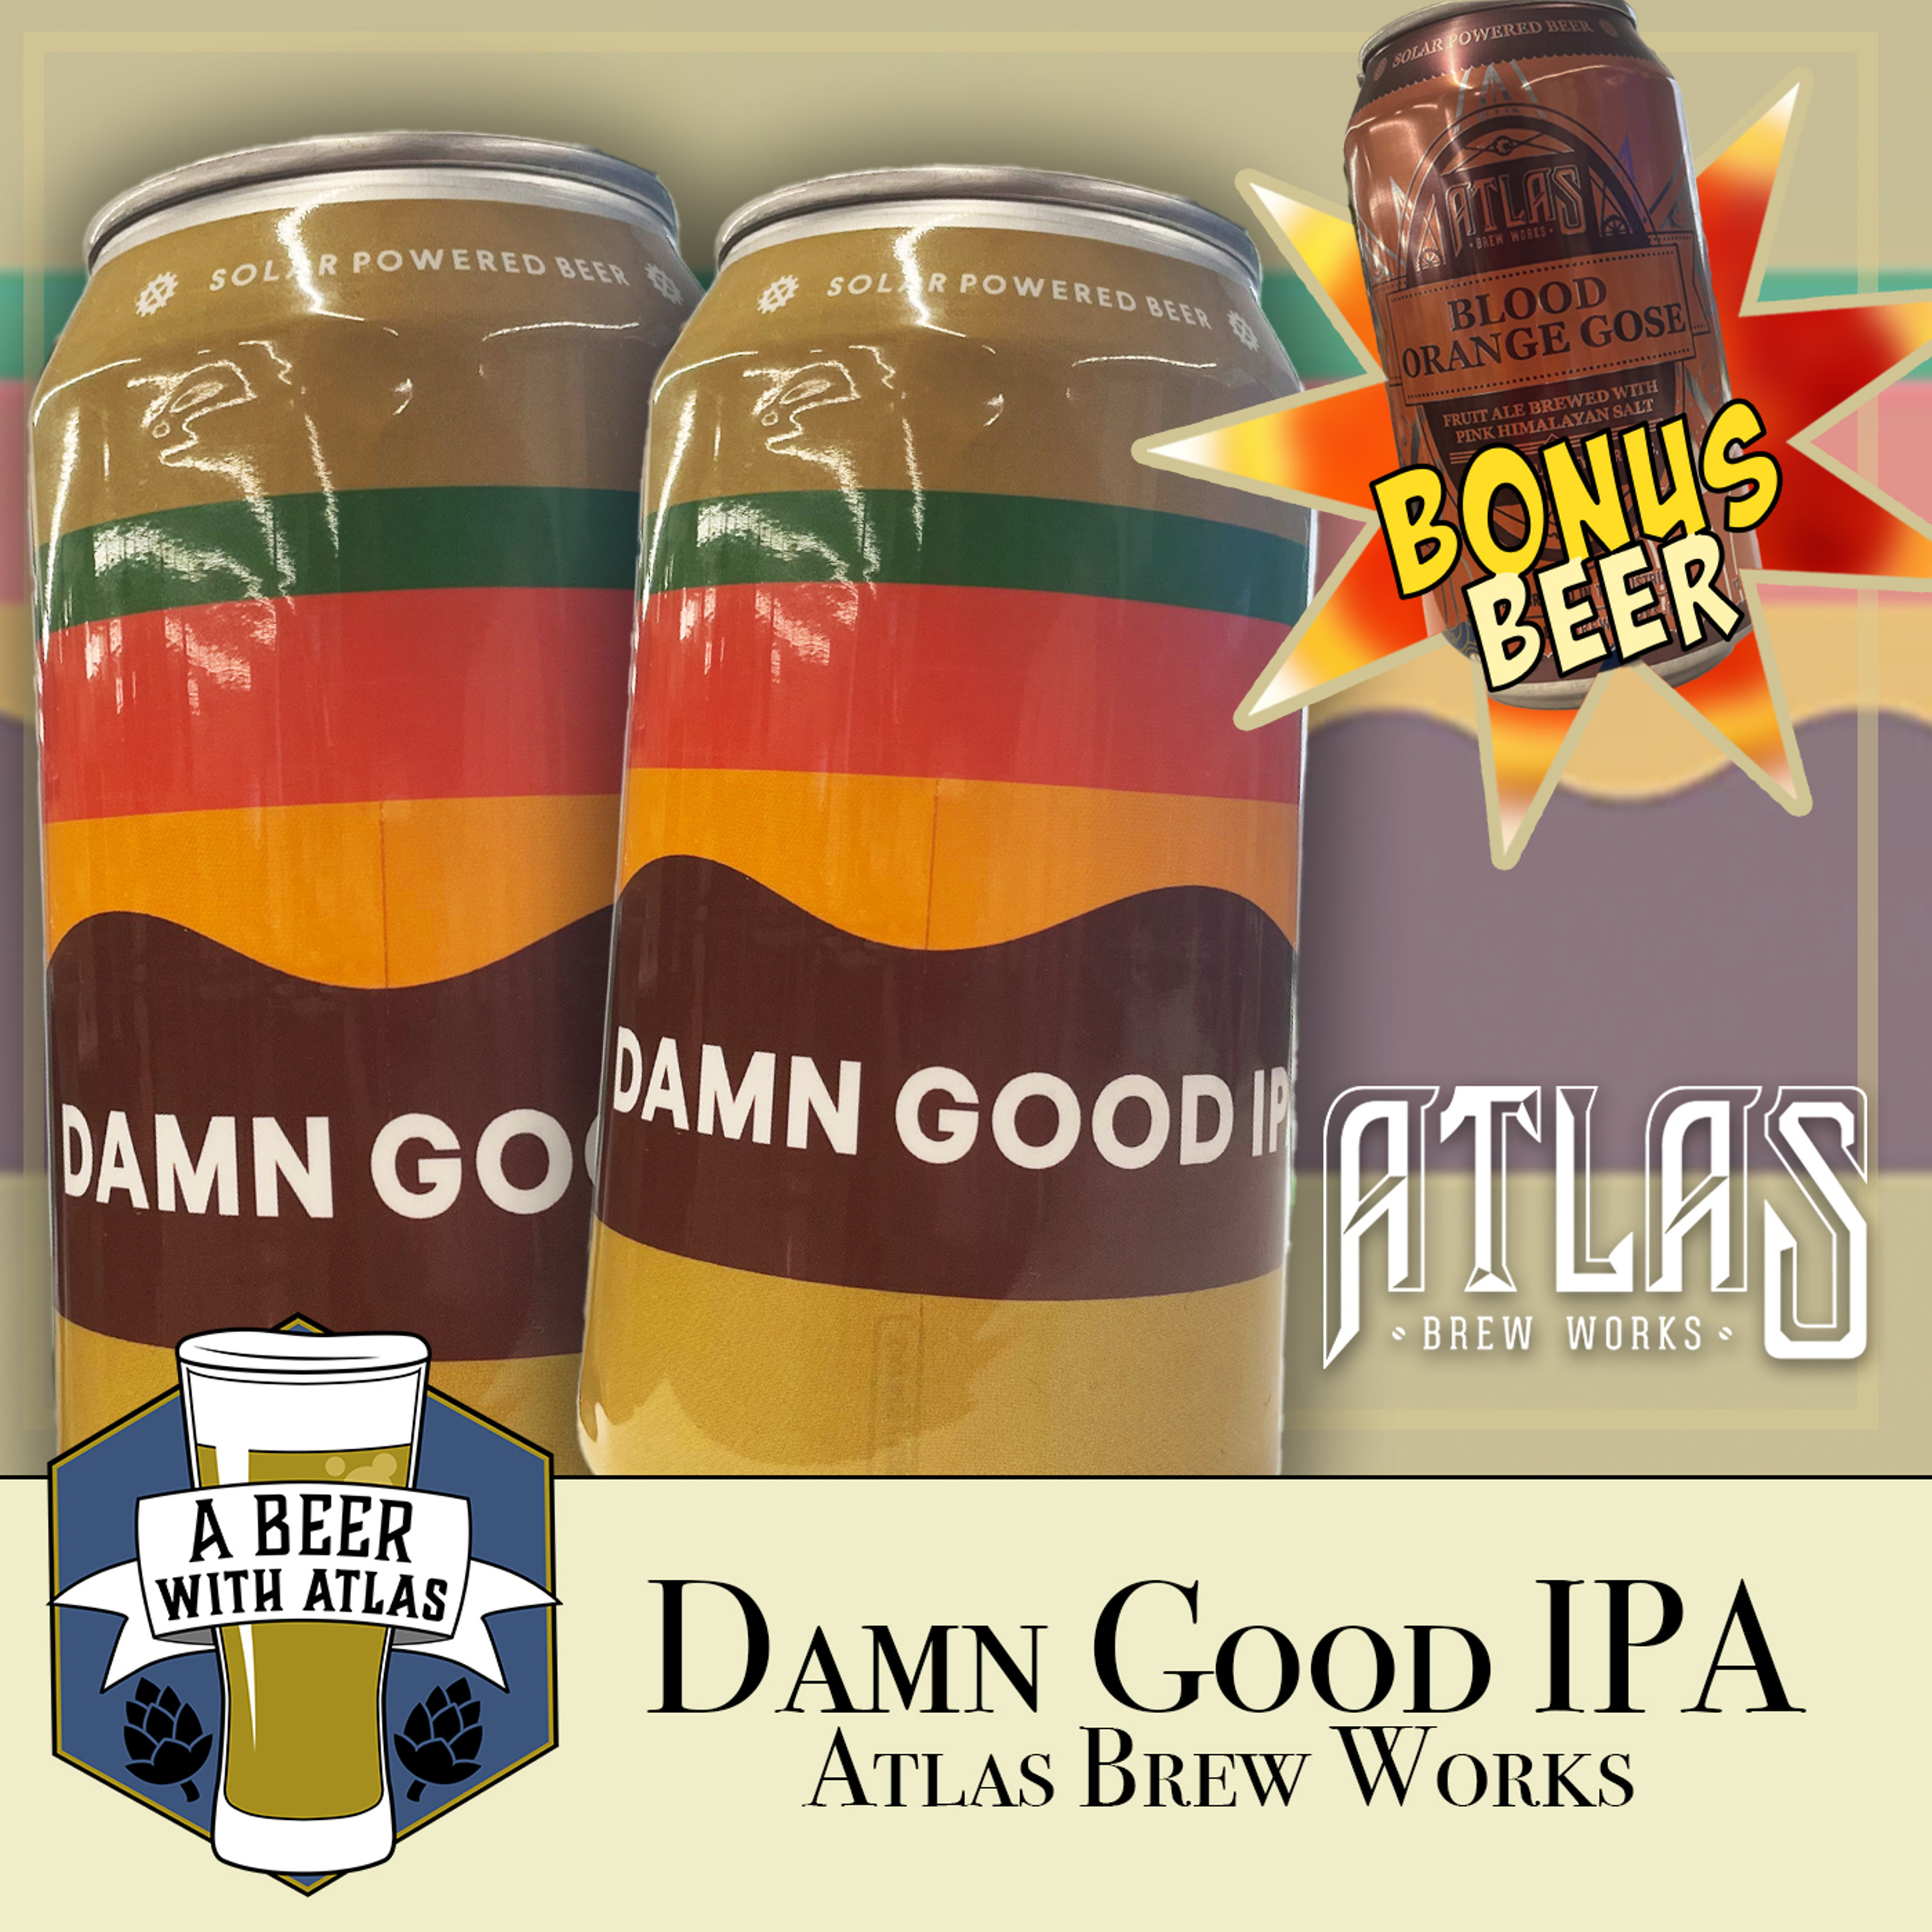 Damn Good IPA by Atlas Brew Works - A Beer with Atlas 207